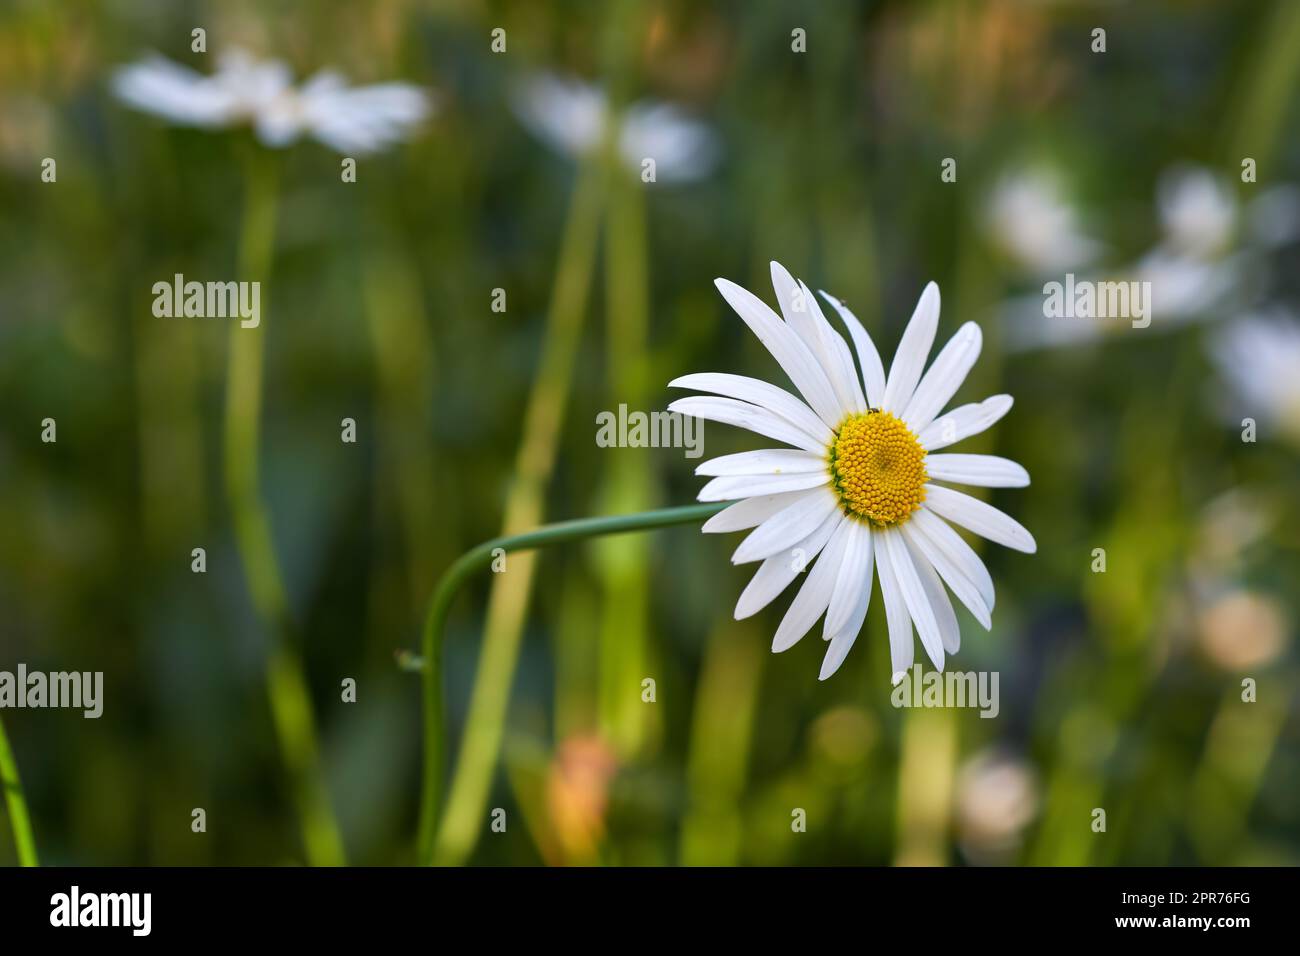 View of a garden with a long common daisy flower with steam and yellow in the center. A closeup view of white daisies flowers with long stem leaves. A group of white flowers shined in the sunlight. Stock Photo